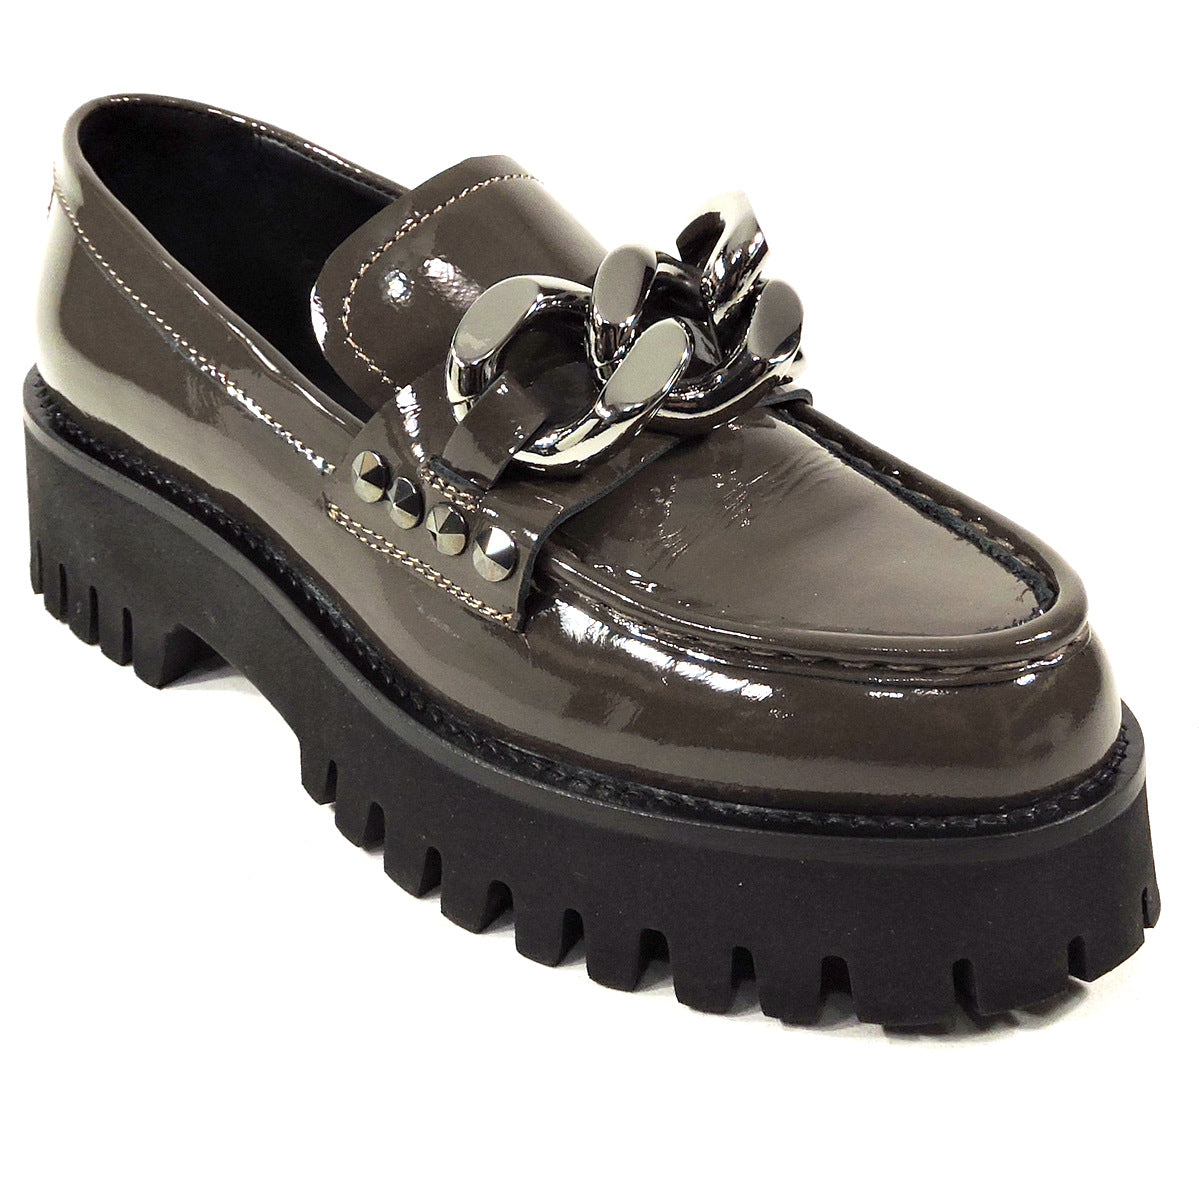 CASADEI 🇮🇹 WOMEN'S BROWN PATENT LEATHER COMFORT FASHION LOAFERS